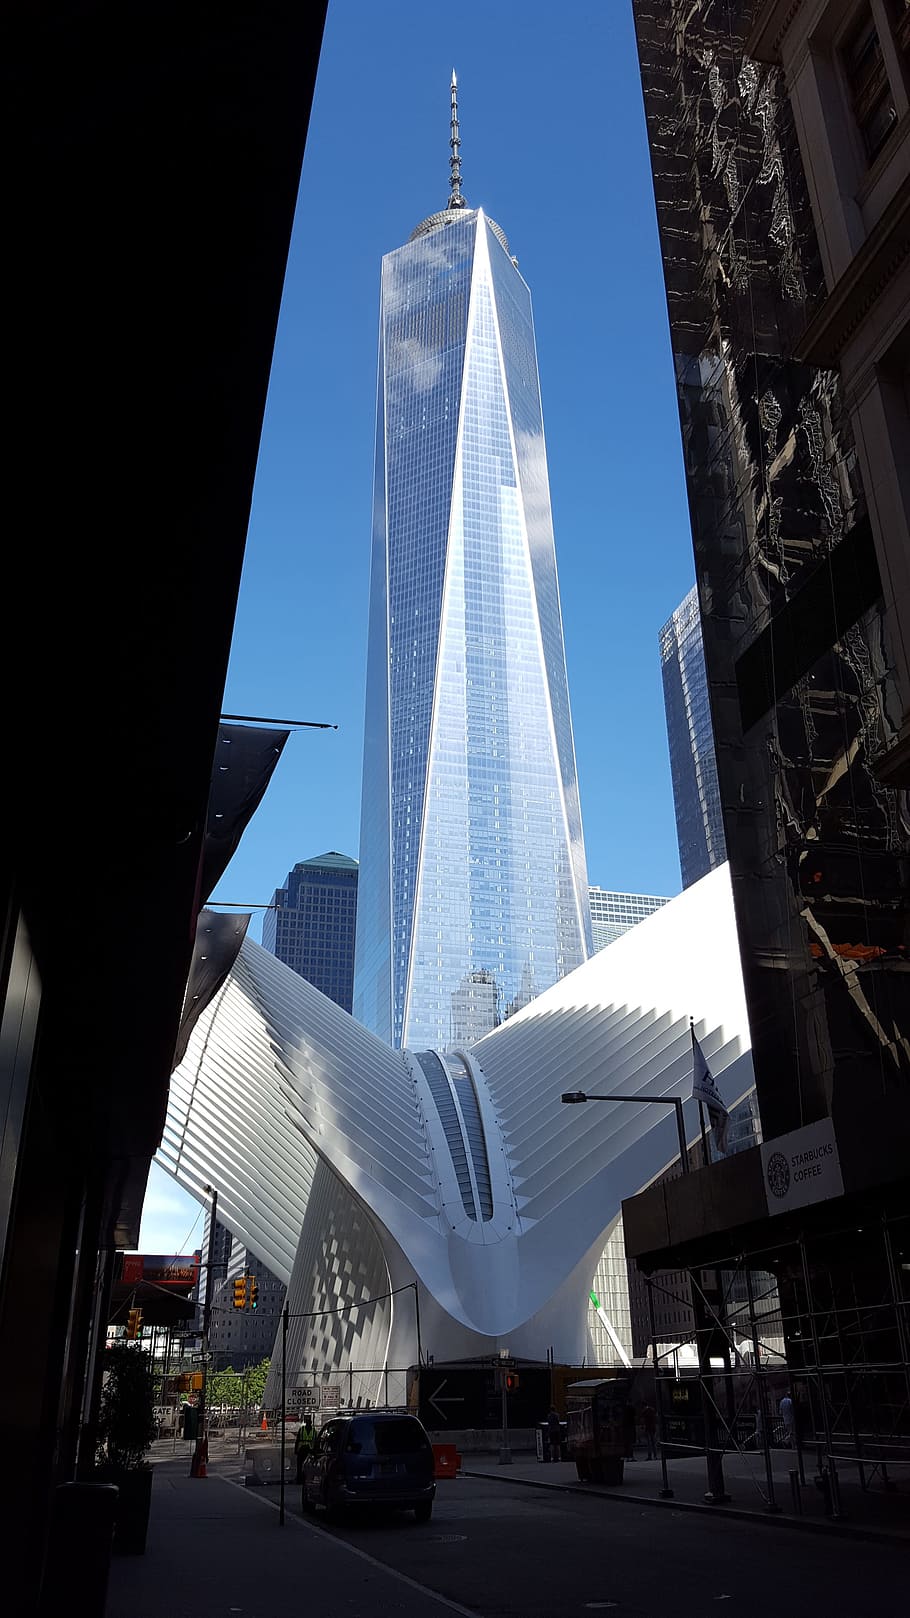 One World Trade Center, formerly called Freedom Tower, is the main building of the new World Trade Center. The World Trade Center Transportation Hub was designed by Santiago Calatrava. The new hub replaces the one that was destroyed in the terrorist attack on September 11, 2001.